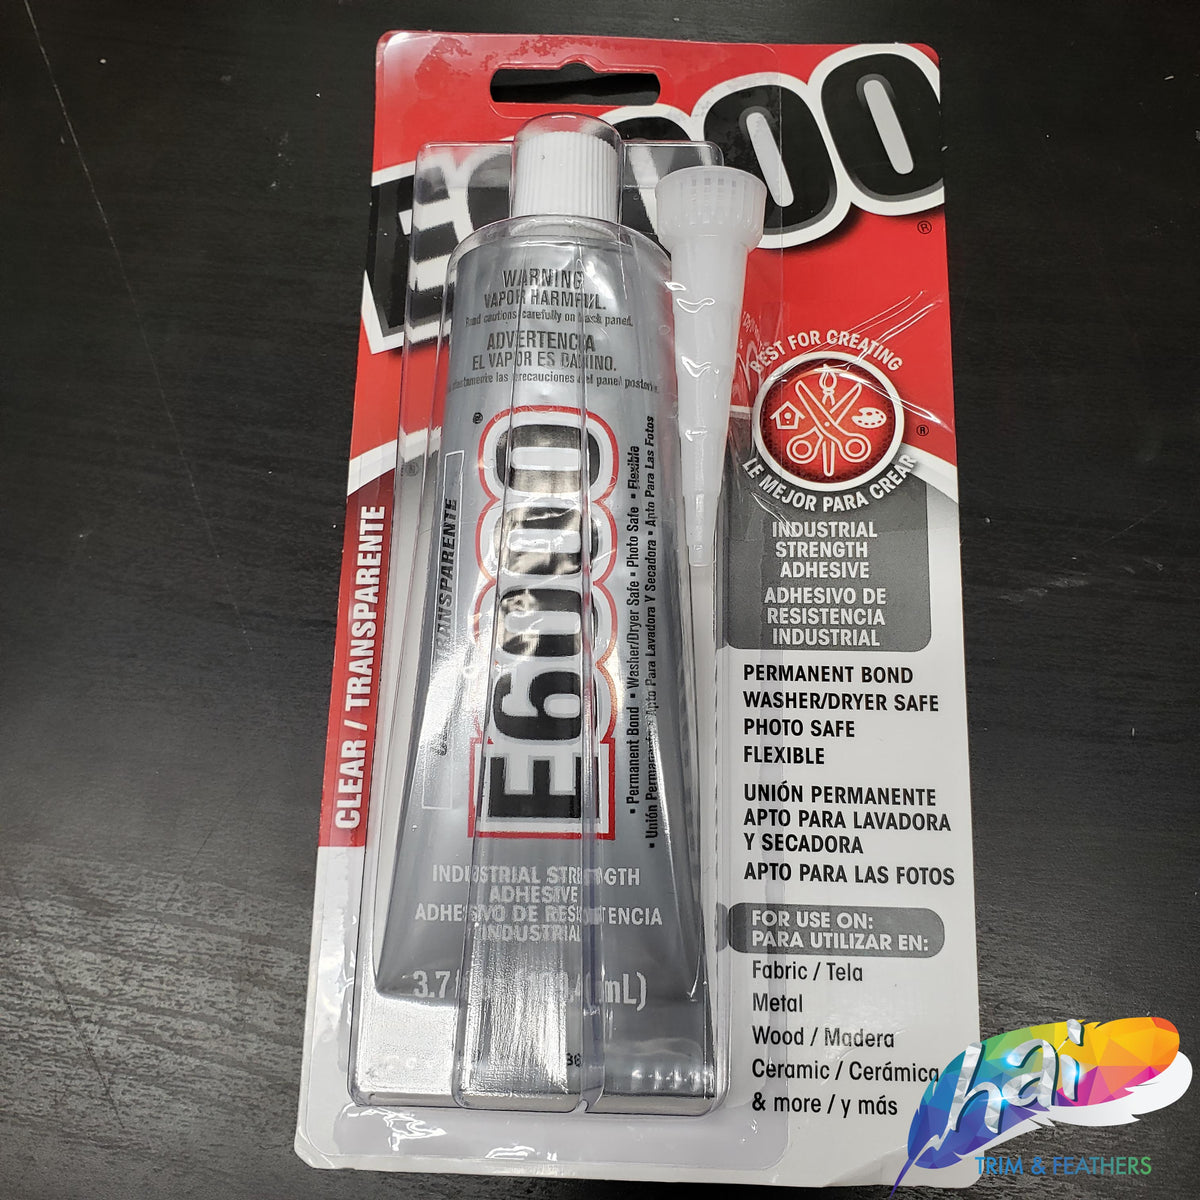 Crafters Emporio - Back in stock is B-6000 glue. This is a multi purpose  glue and can be used for sticking materials like plastic, metals, rubber,  cloth, etc etc. For more details